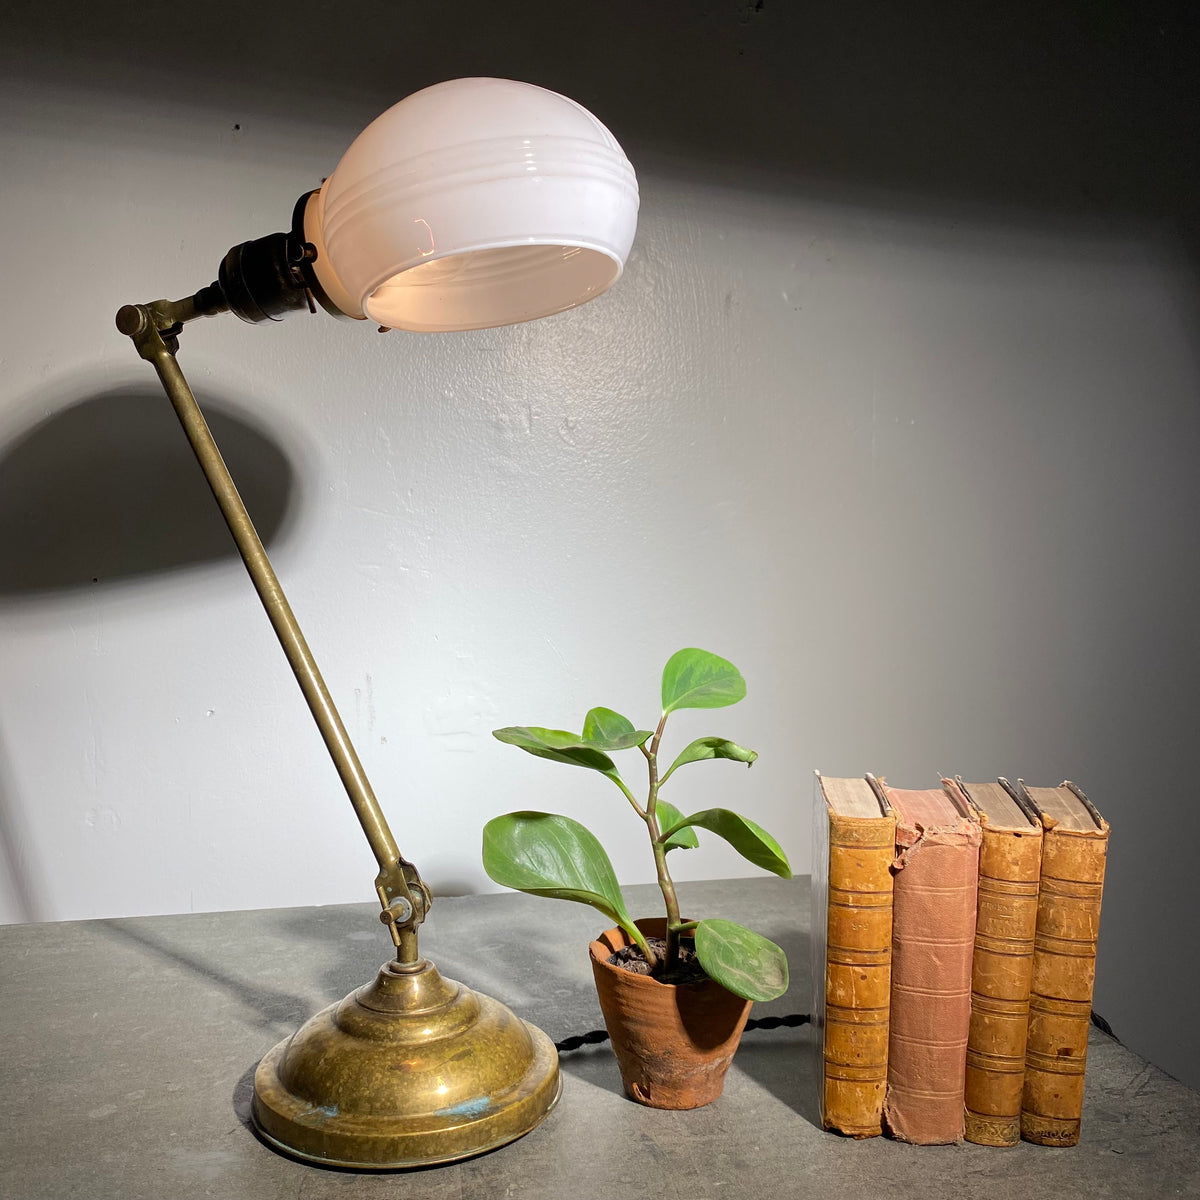 Faries Manufacturig Co. Brass Lamp with Milk Glass Shade